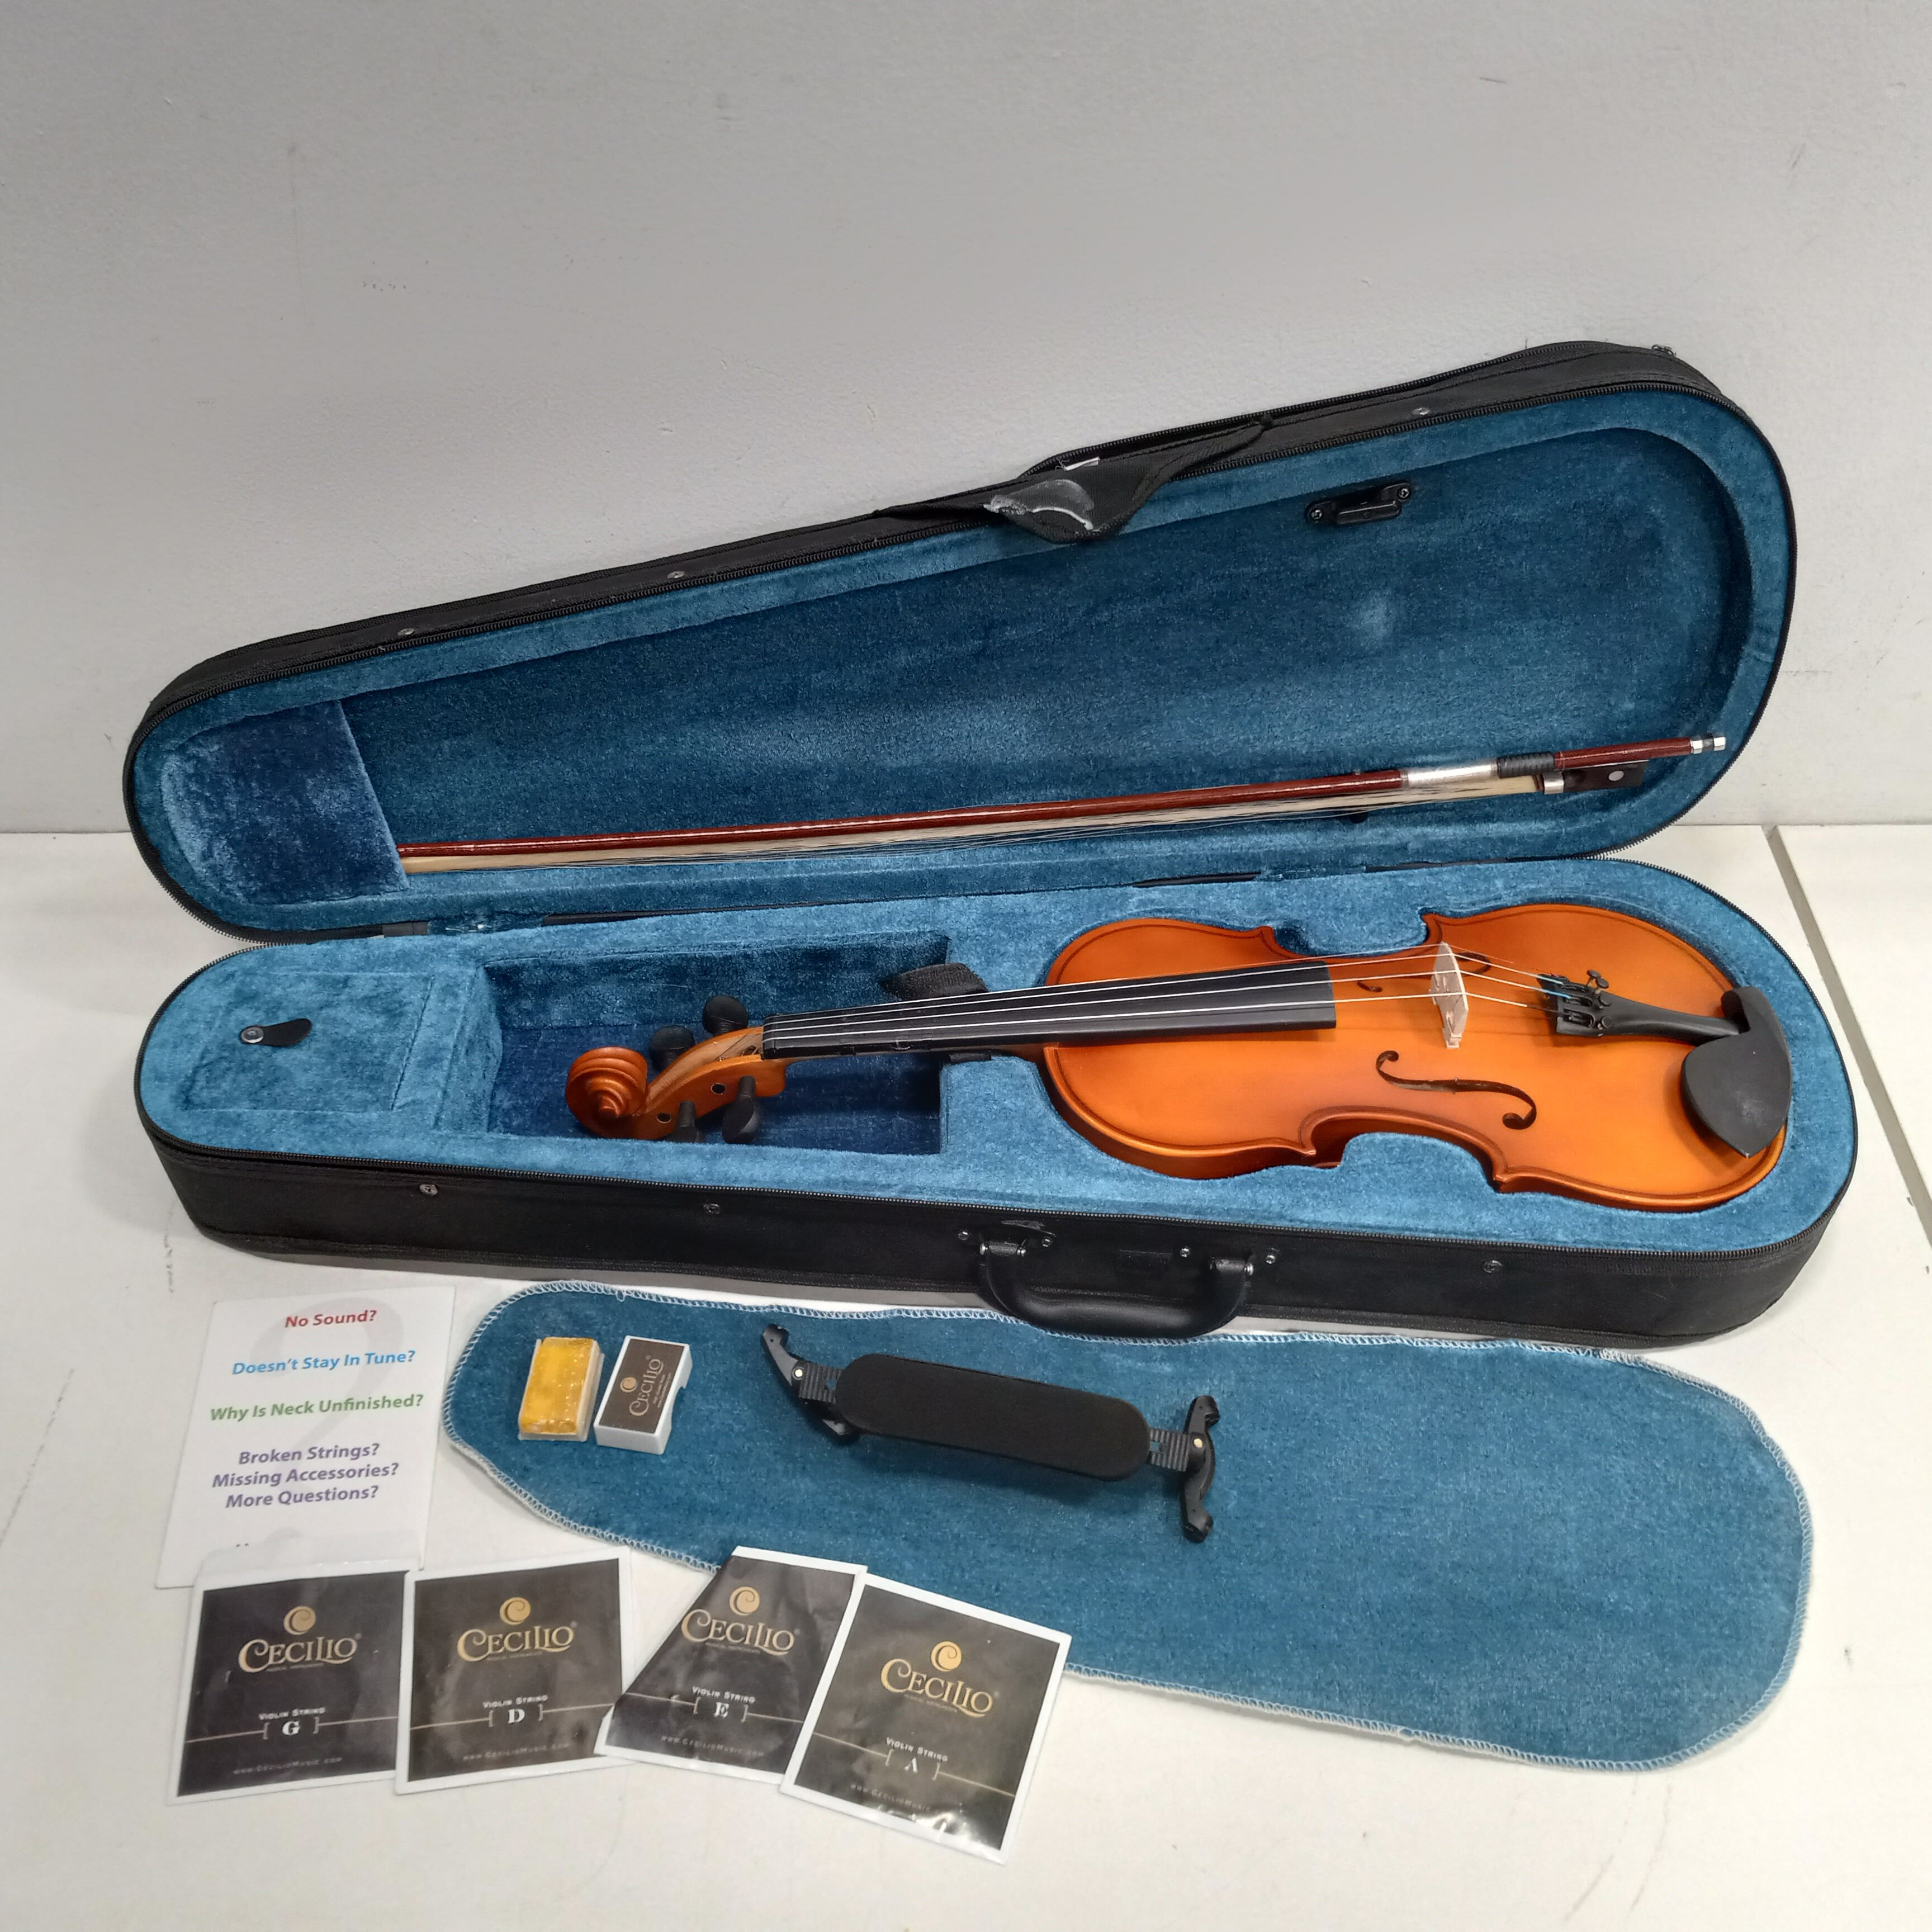 Mendini By Celicio Violin 3/4 Size In Case With Strings, Resin, Chin Rest,  And Bow